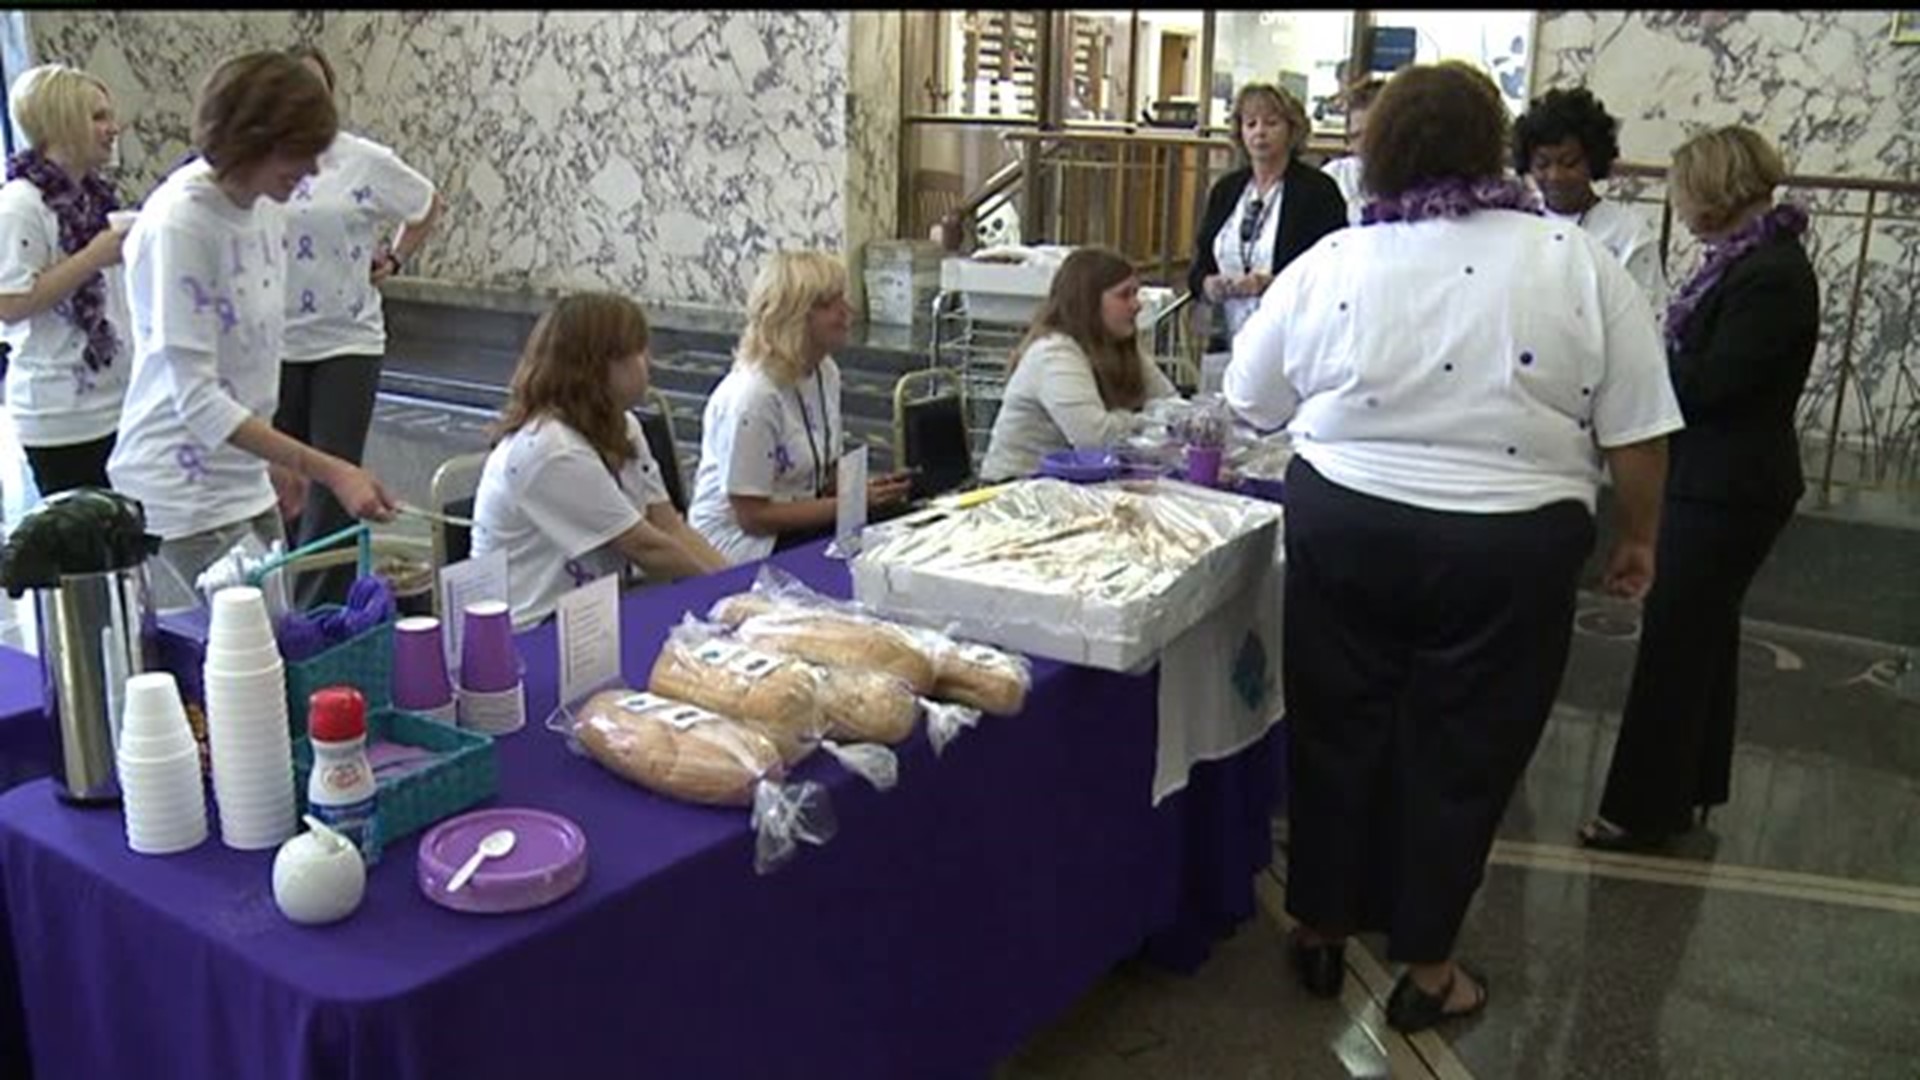 Locals show support for domestic violence victims